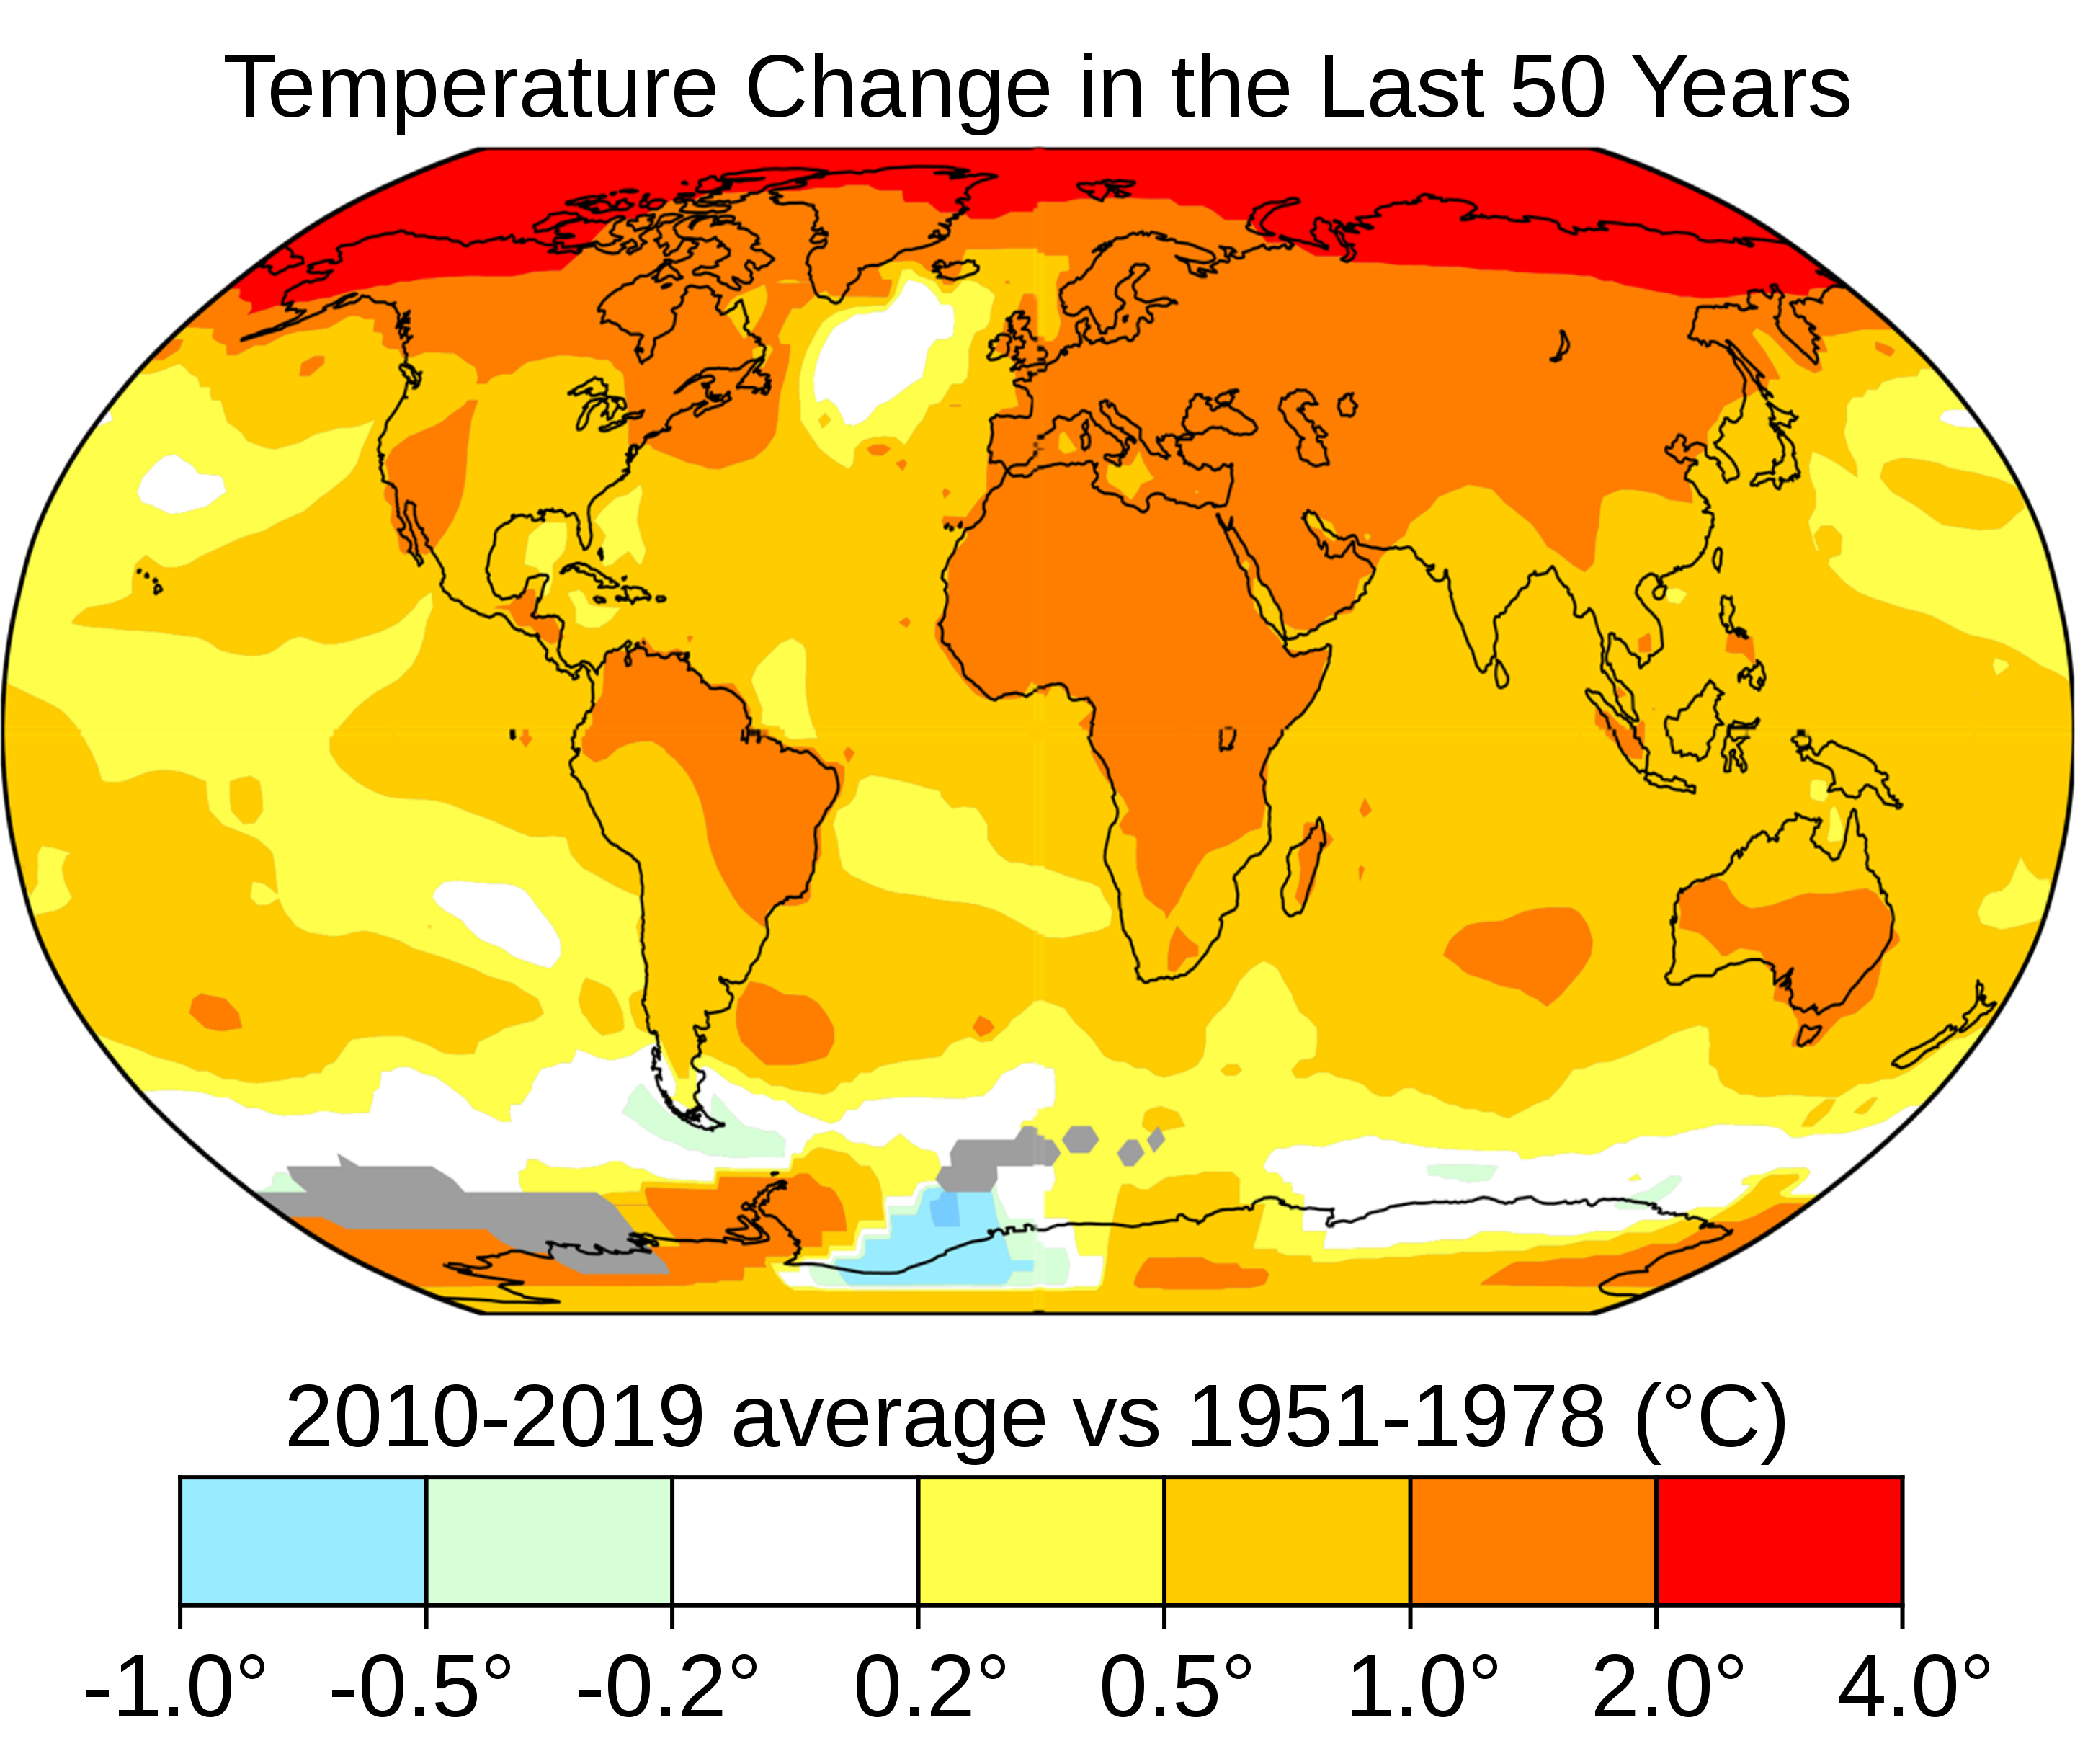 Average global temperatures from 2010 to 2019